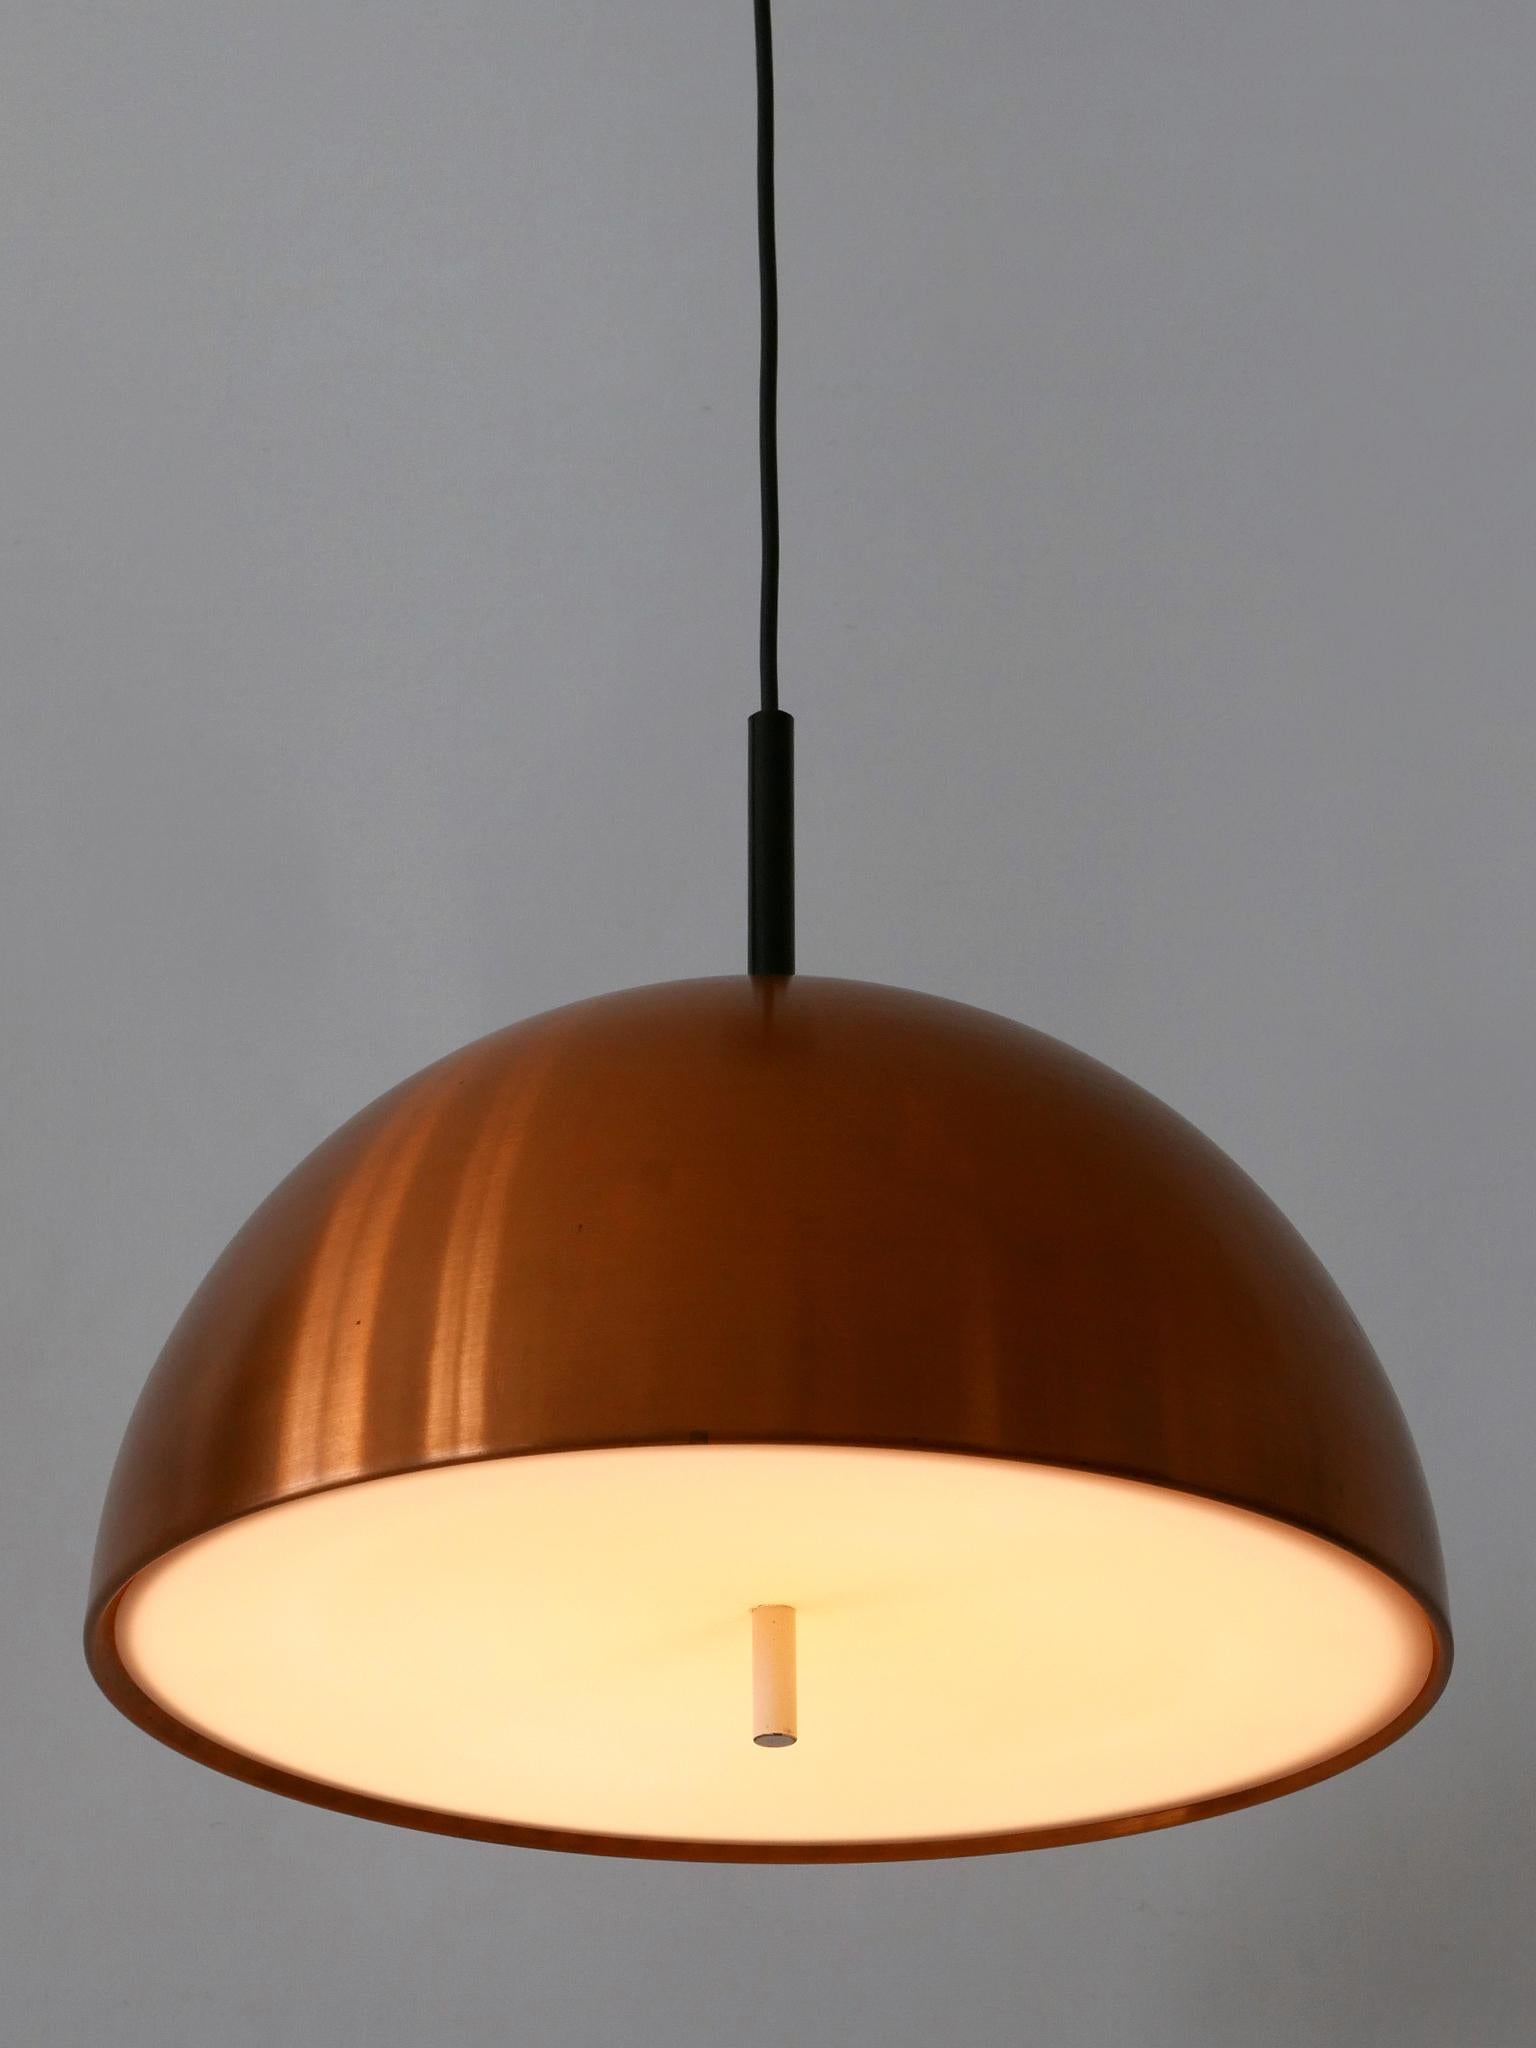 Minimalistic and elegant Mid-Century Modern copper pendant lamp or hanging light. Designed and manufactured by Staff & Schwarz Leuchtenwerke, Germany, 1960s.

Executed in copper sheet and plexiglass, the pendant lamp needs 2 x E27 / E26 Edison screw